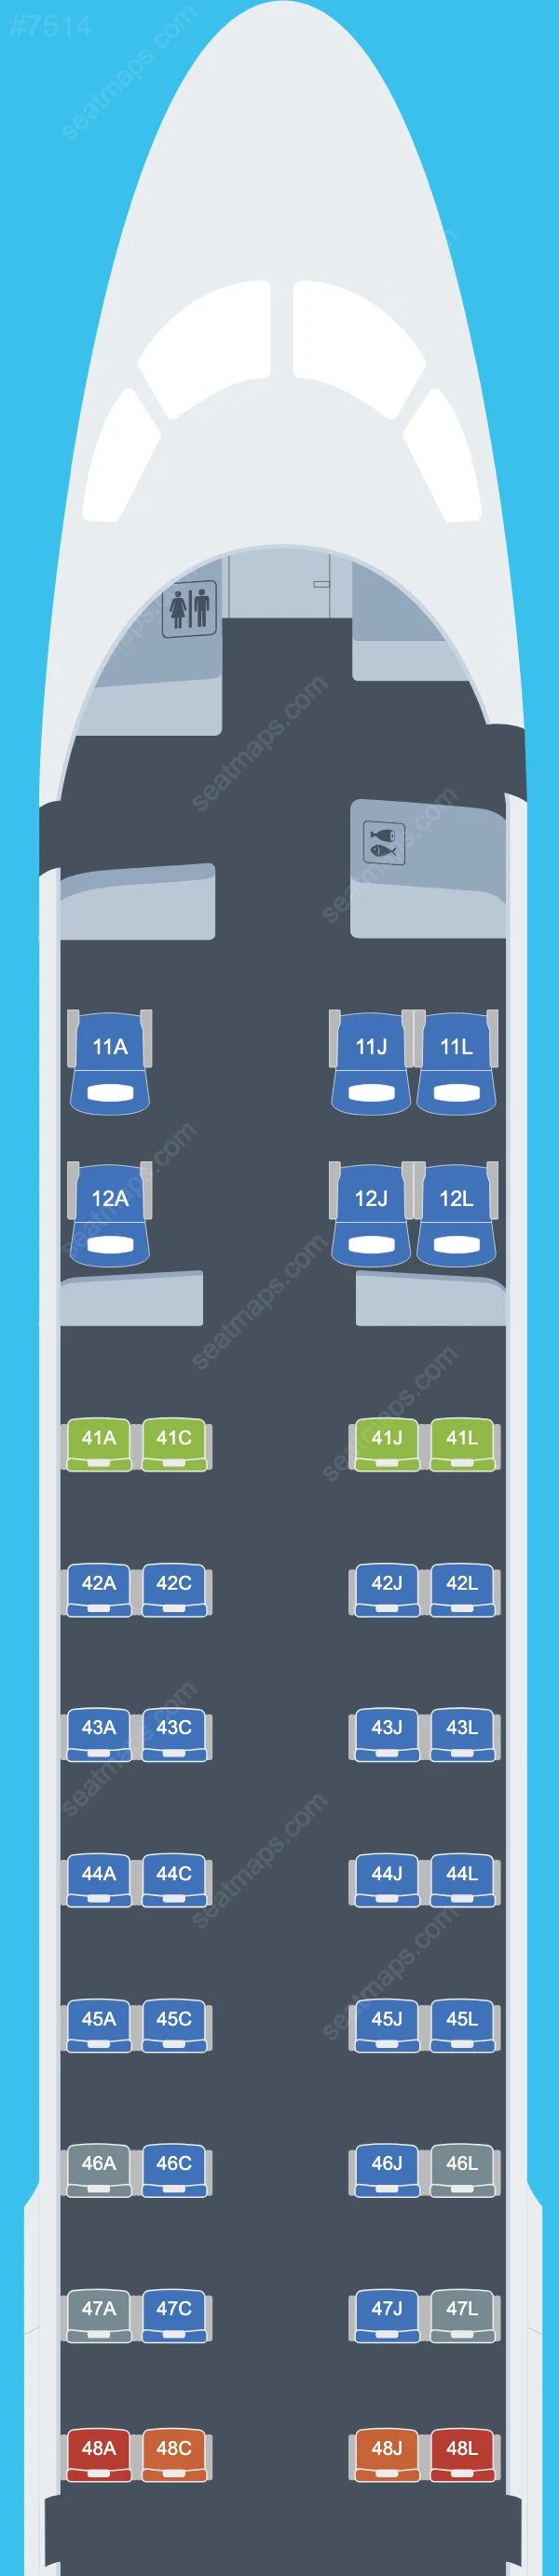 Hebei Airlines Embraer E190 seatmap preview